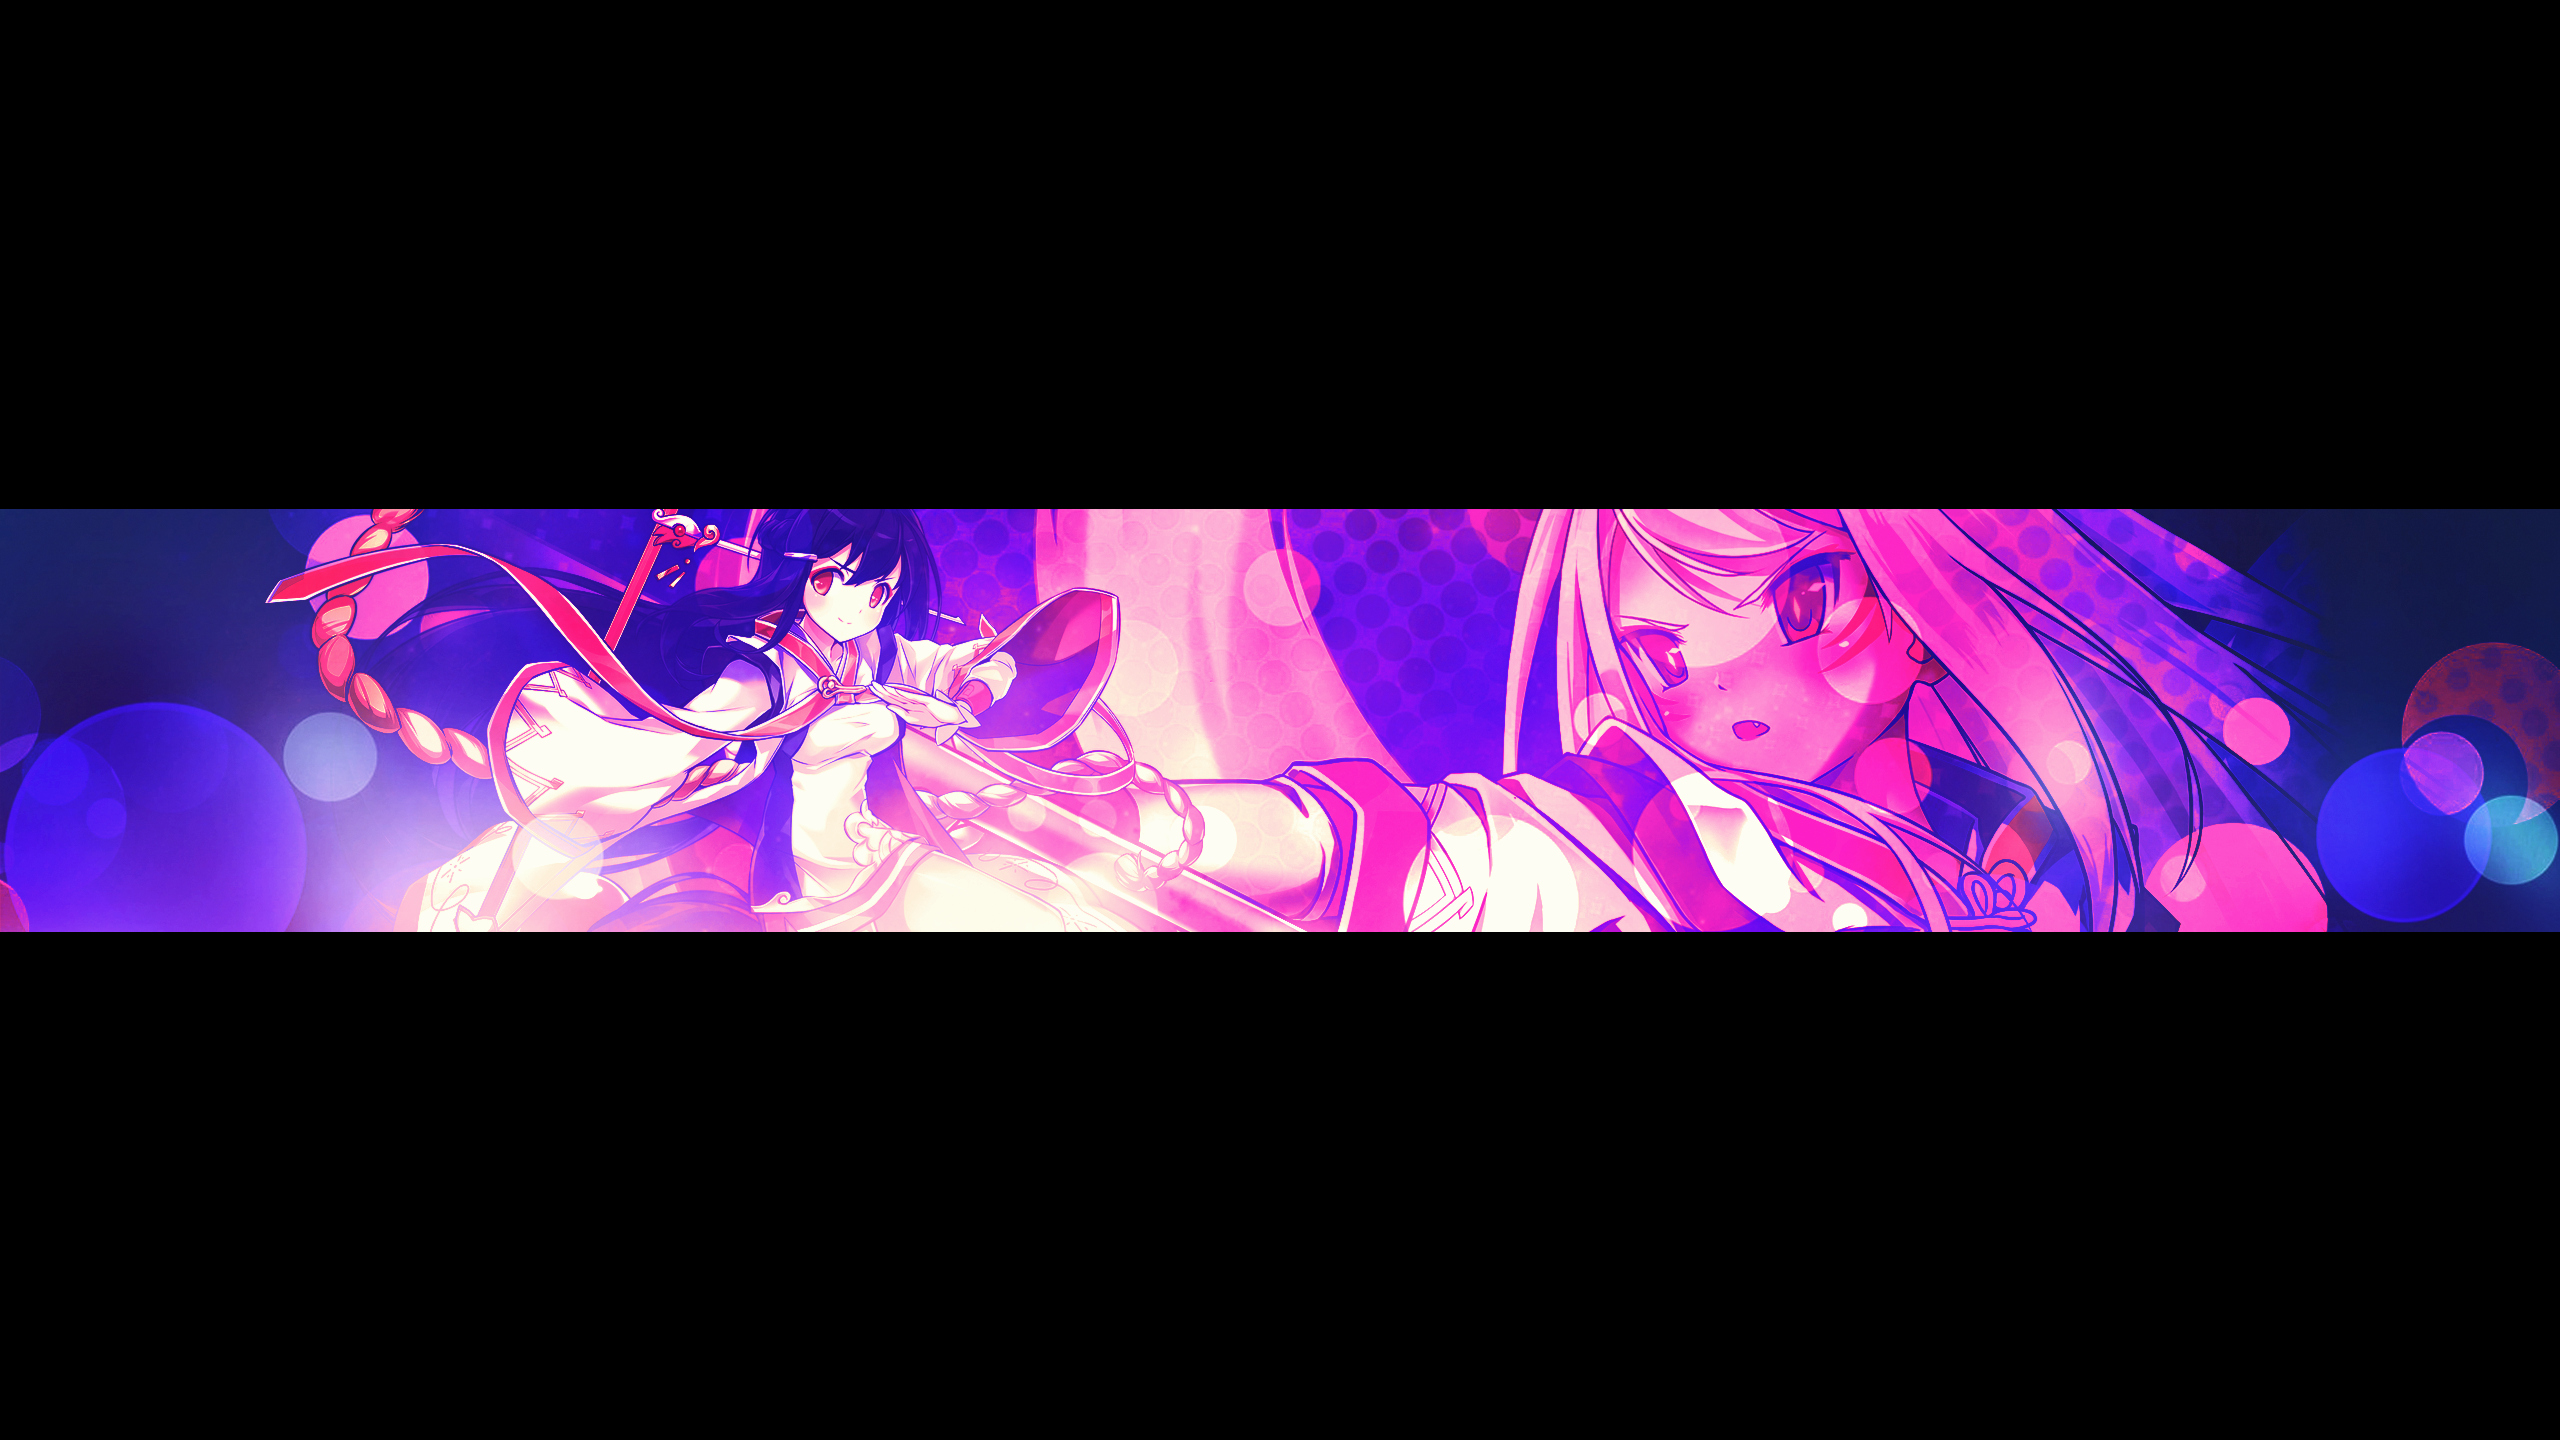 Anime Youtube Banner Template No Text